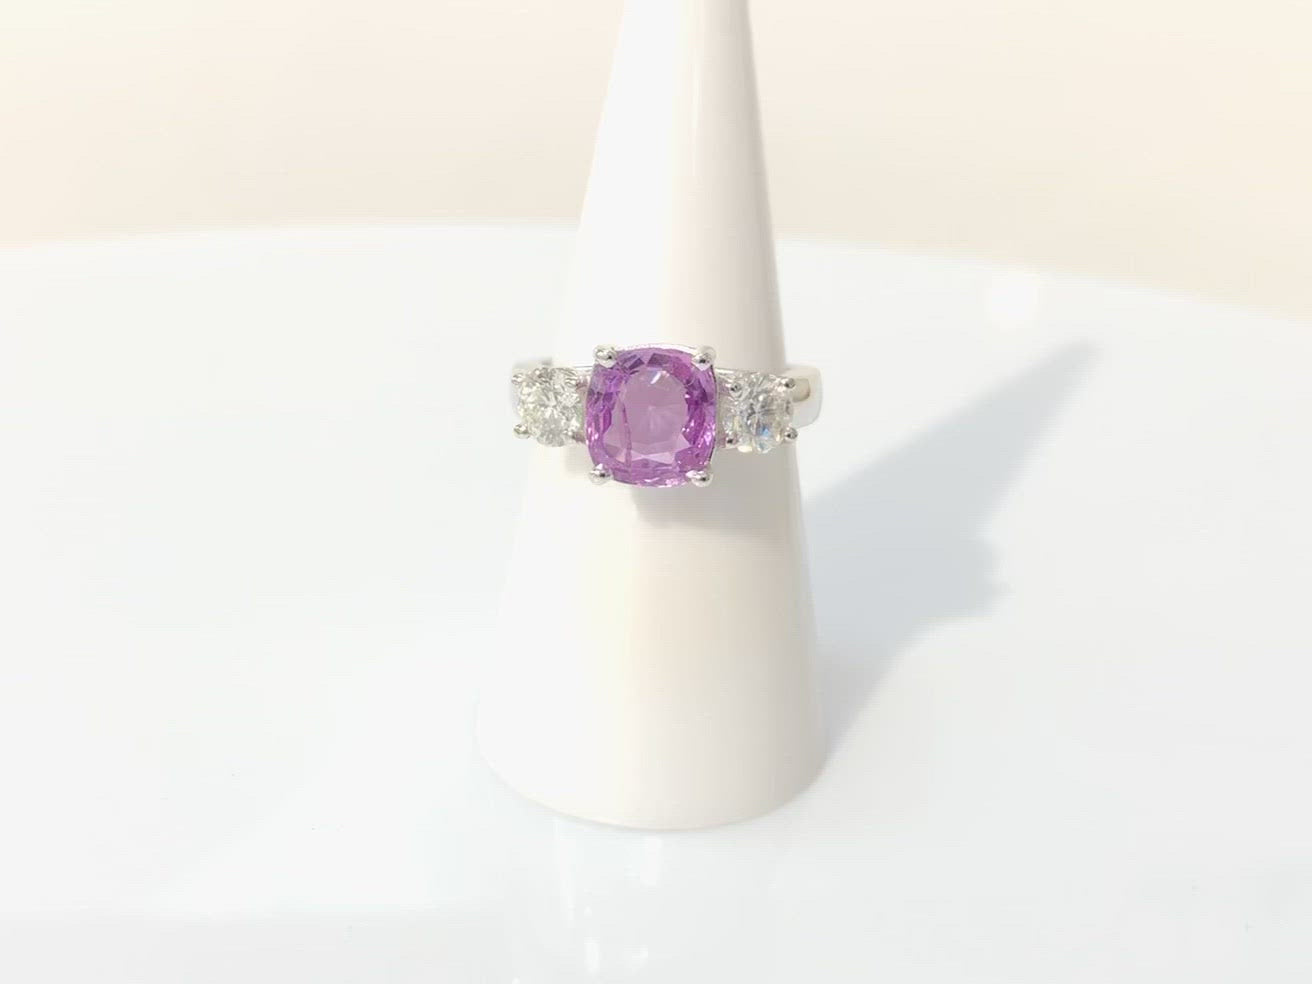 A three stone pink sapphire and two diamonds, white gold engagement ring.